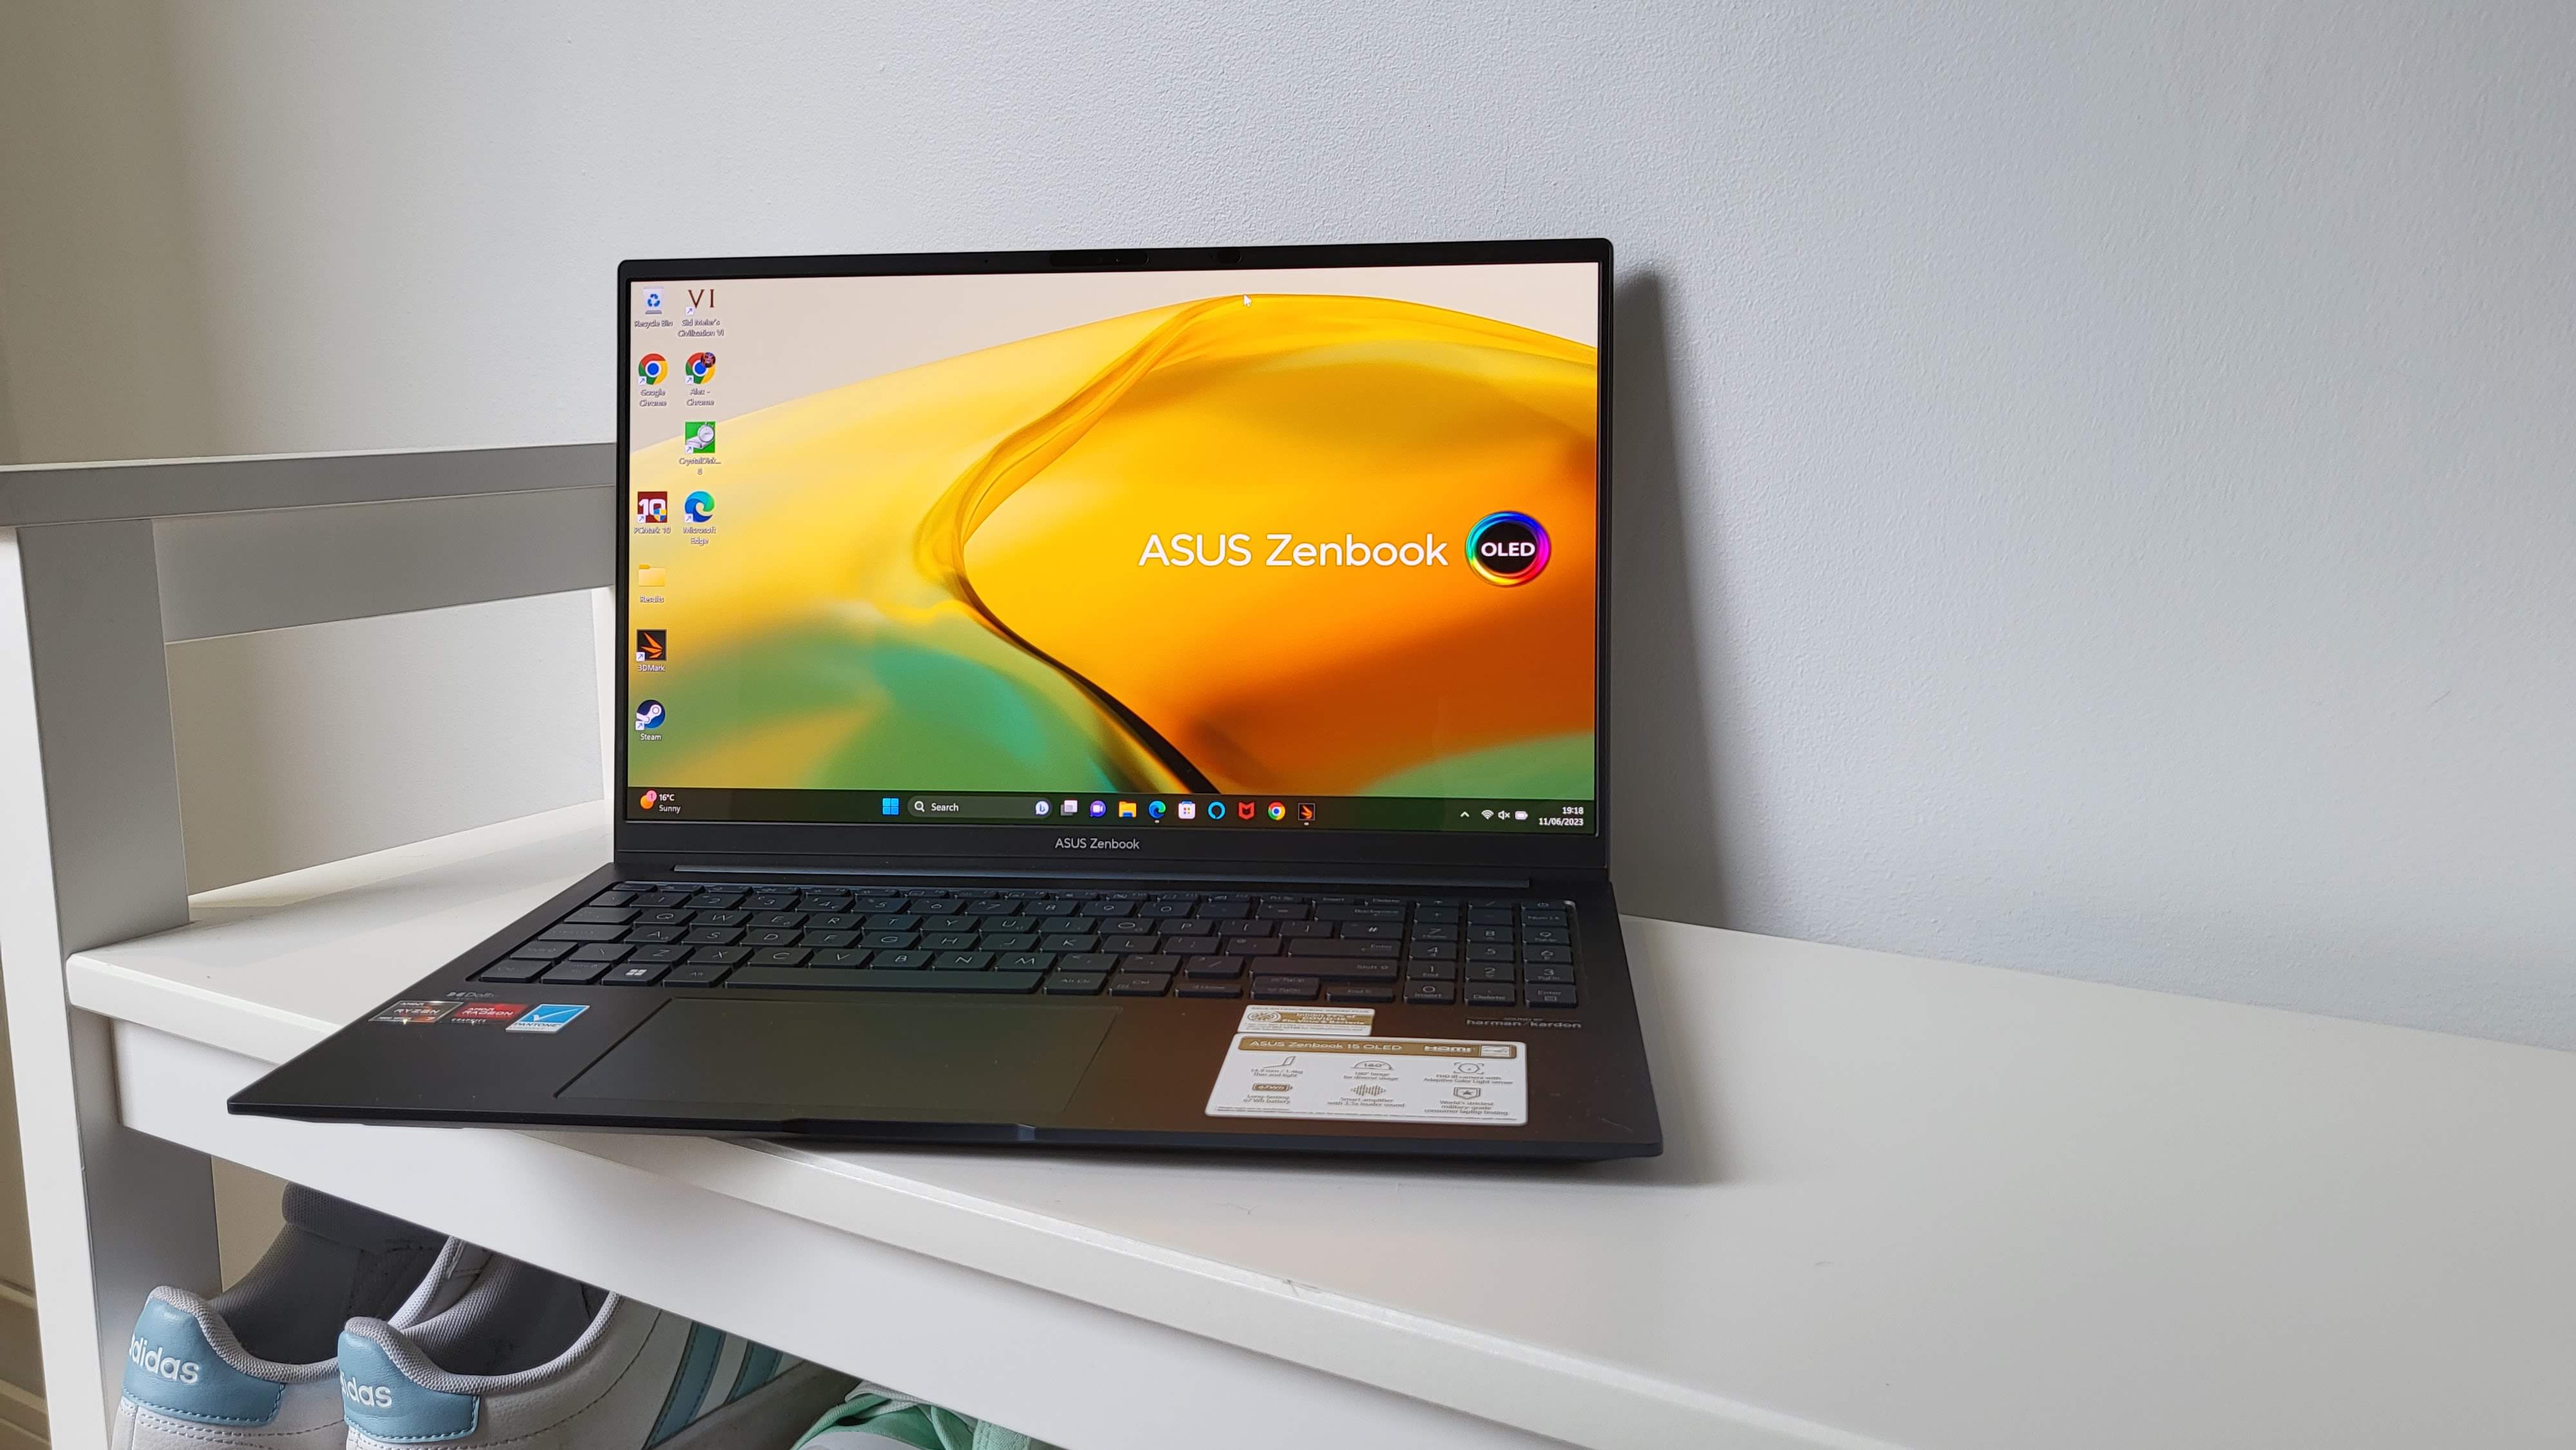 ASUS Zenbook 15 OLED review: fast AMD-powered laptop with great screen